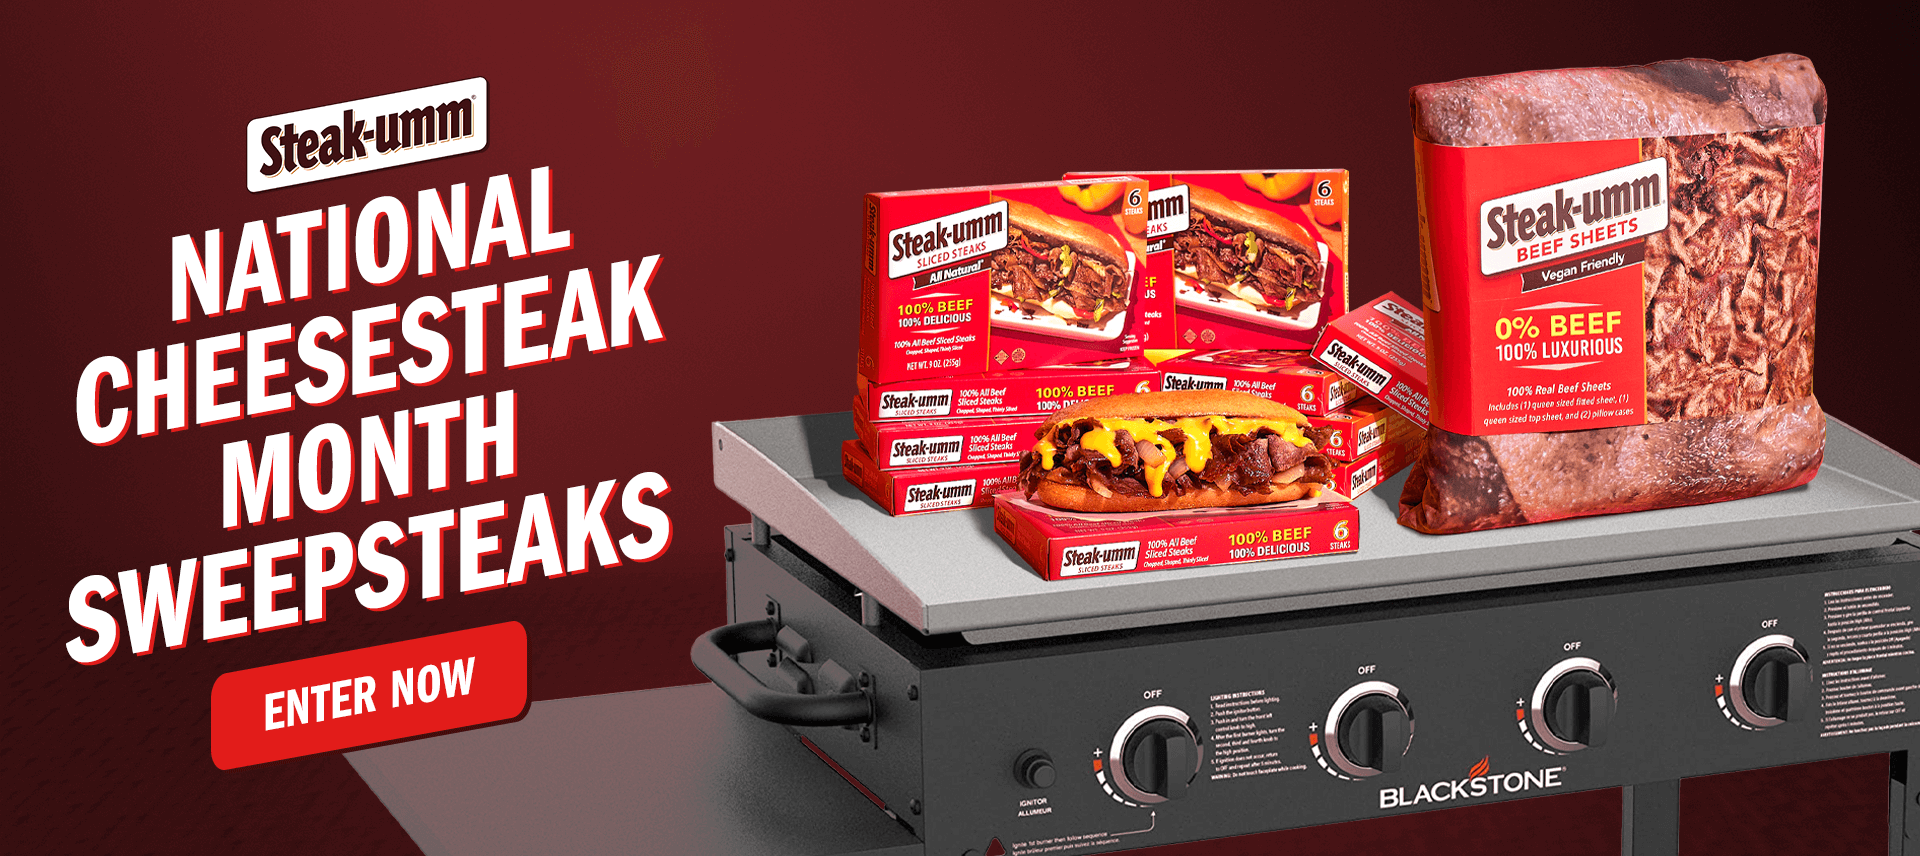 Text on top of a red themed background with Steak-umm product on a griddle that says National Cheesesteak Month sweepsteaks with a button to enter now.